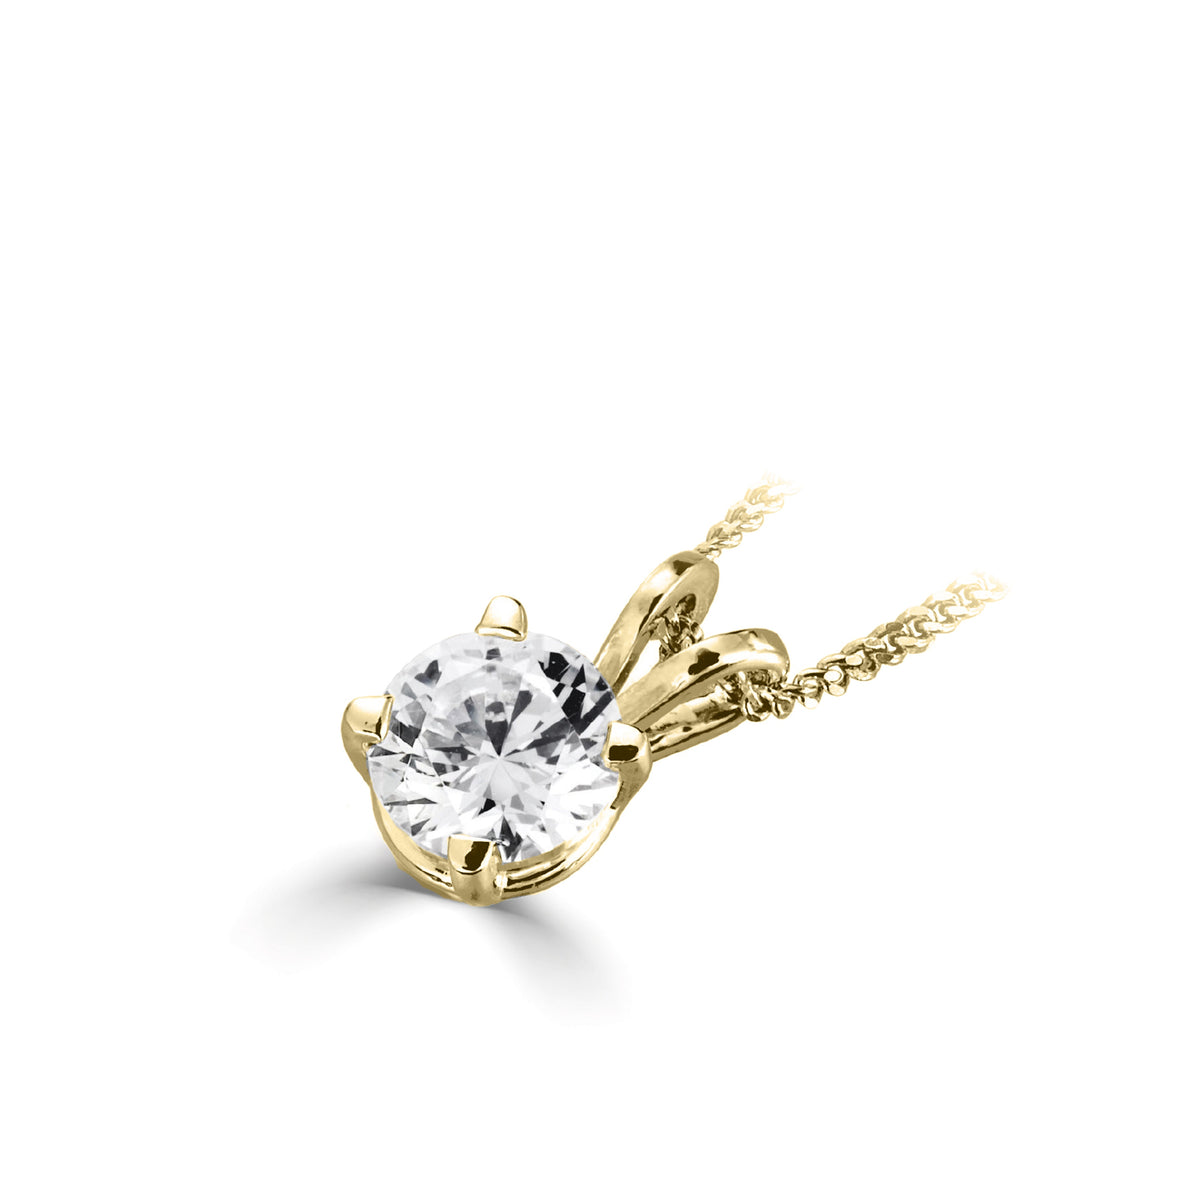 18ct Yellow Gold and Platinum Lab Grown Diamond Solitaire Pendant weighing 1.02ct